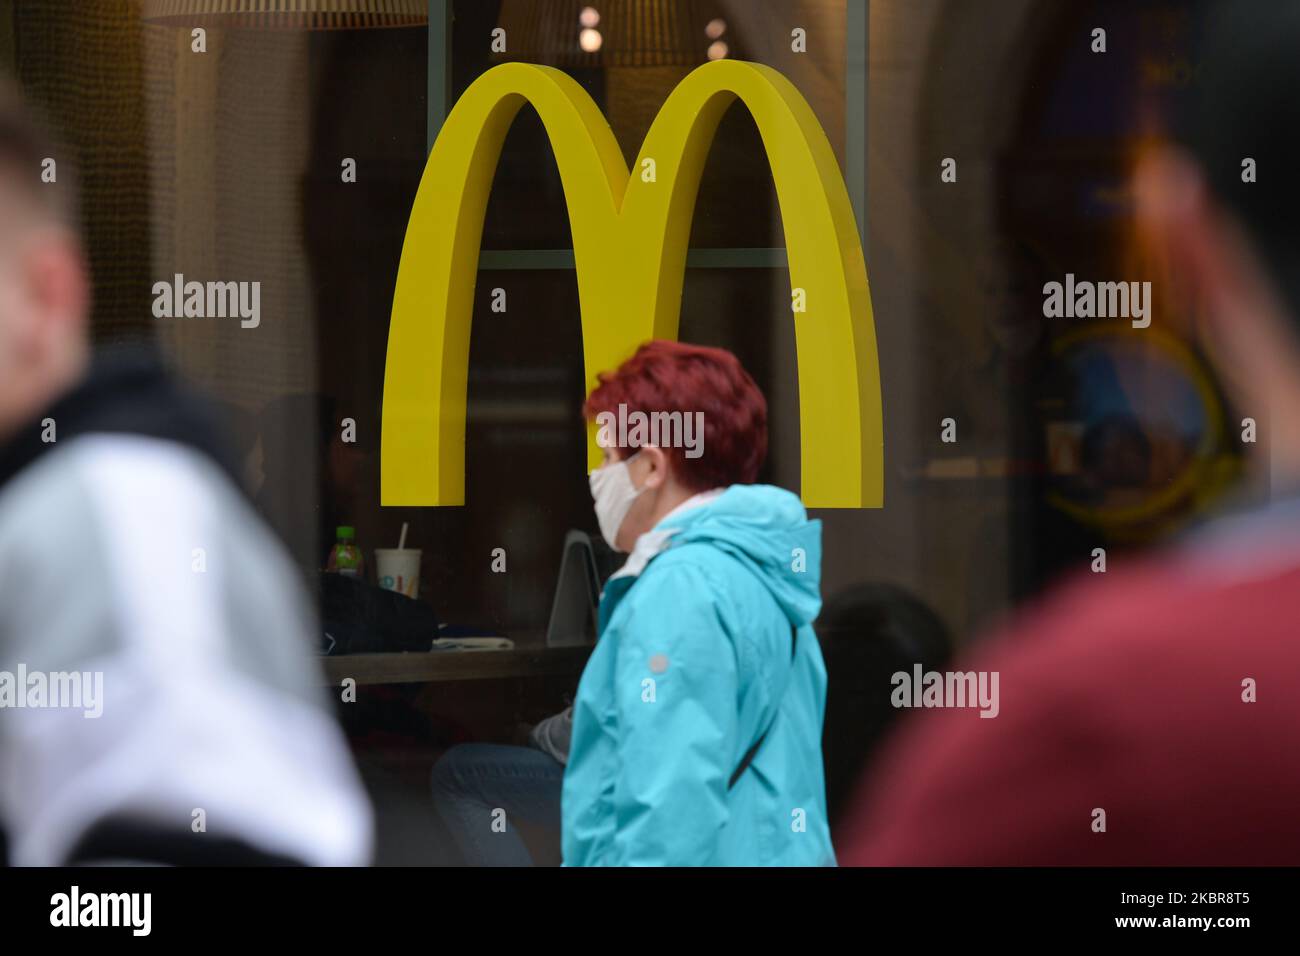 People walk by McDonald's restaurant in Krakow's Old Town. Poland surpased today 30,000 coronavirus cases. In one month, a total number increased by 10,000 new cases. Poland The Health Ministry reported today 407 new cases and 16 deaths, rising the total count to 30,195 people infected, 1,272 deaths and 14,654 recovered. On June 16, 2020, in Krakow, Poland. (Photo by Artur Widak/NurPhoto) Stock Photo